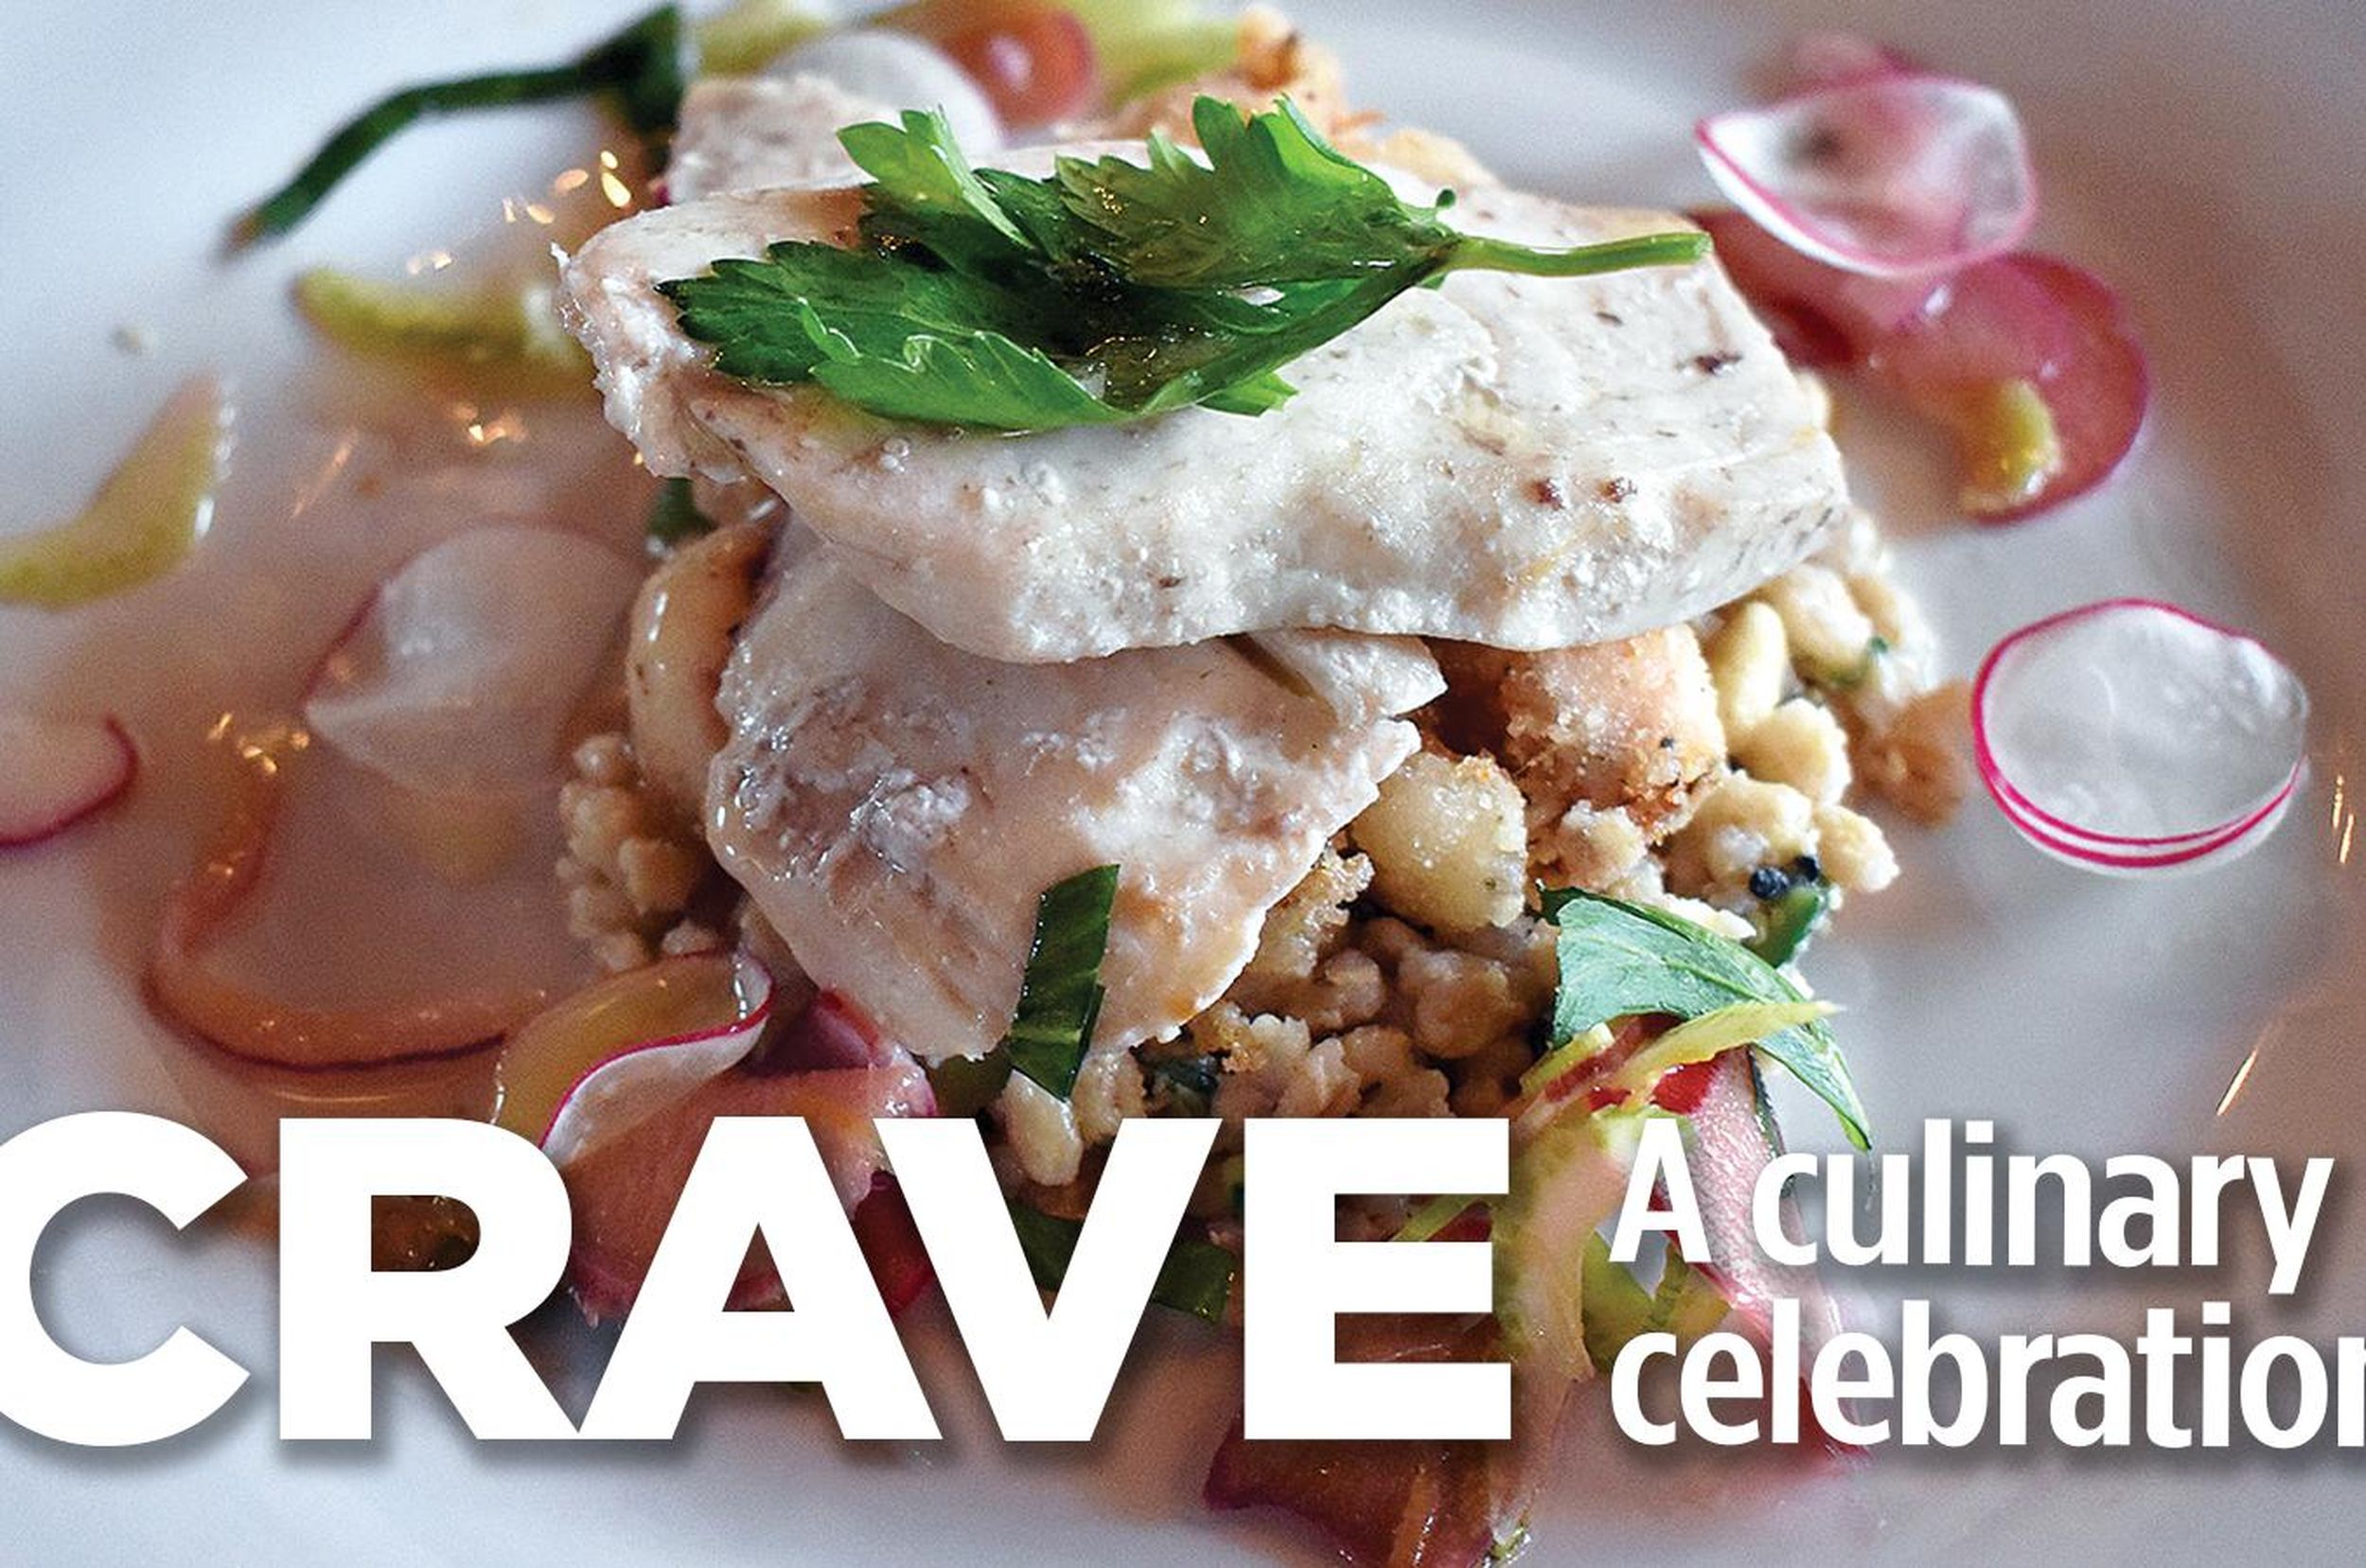 A culinary celebration: Crave Food and Drink reveals lineup of VIP ...